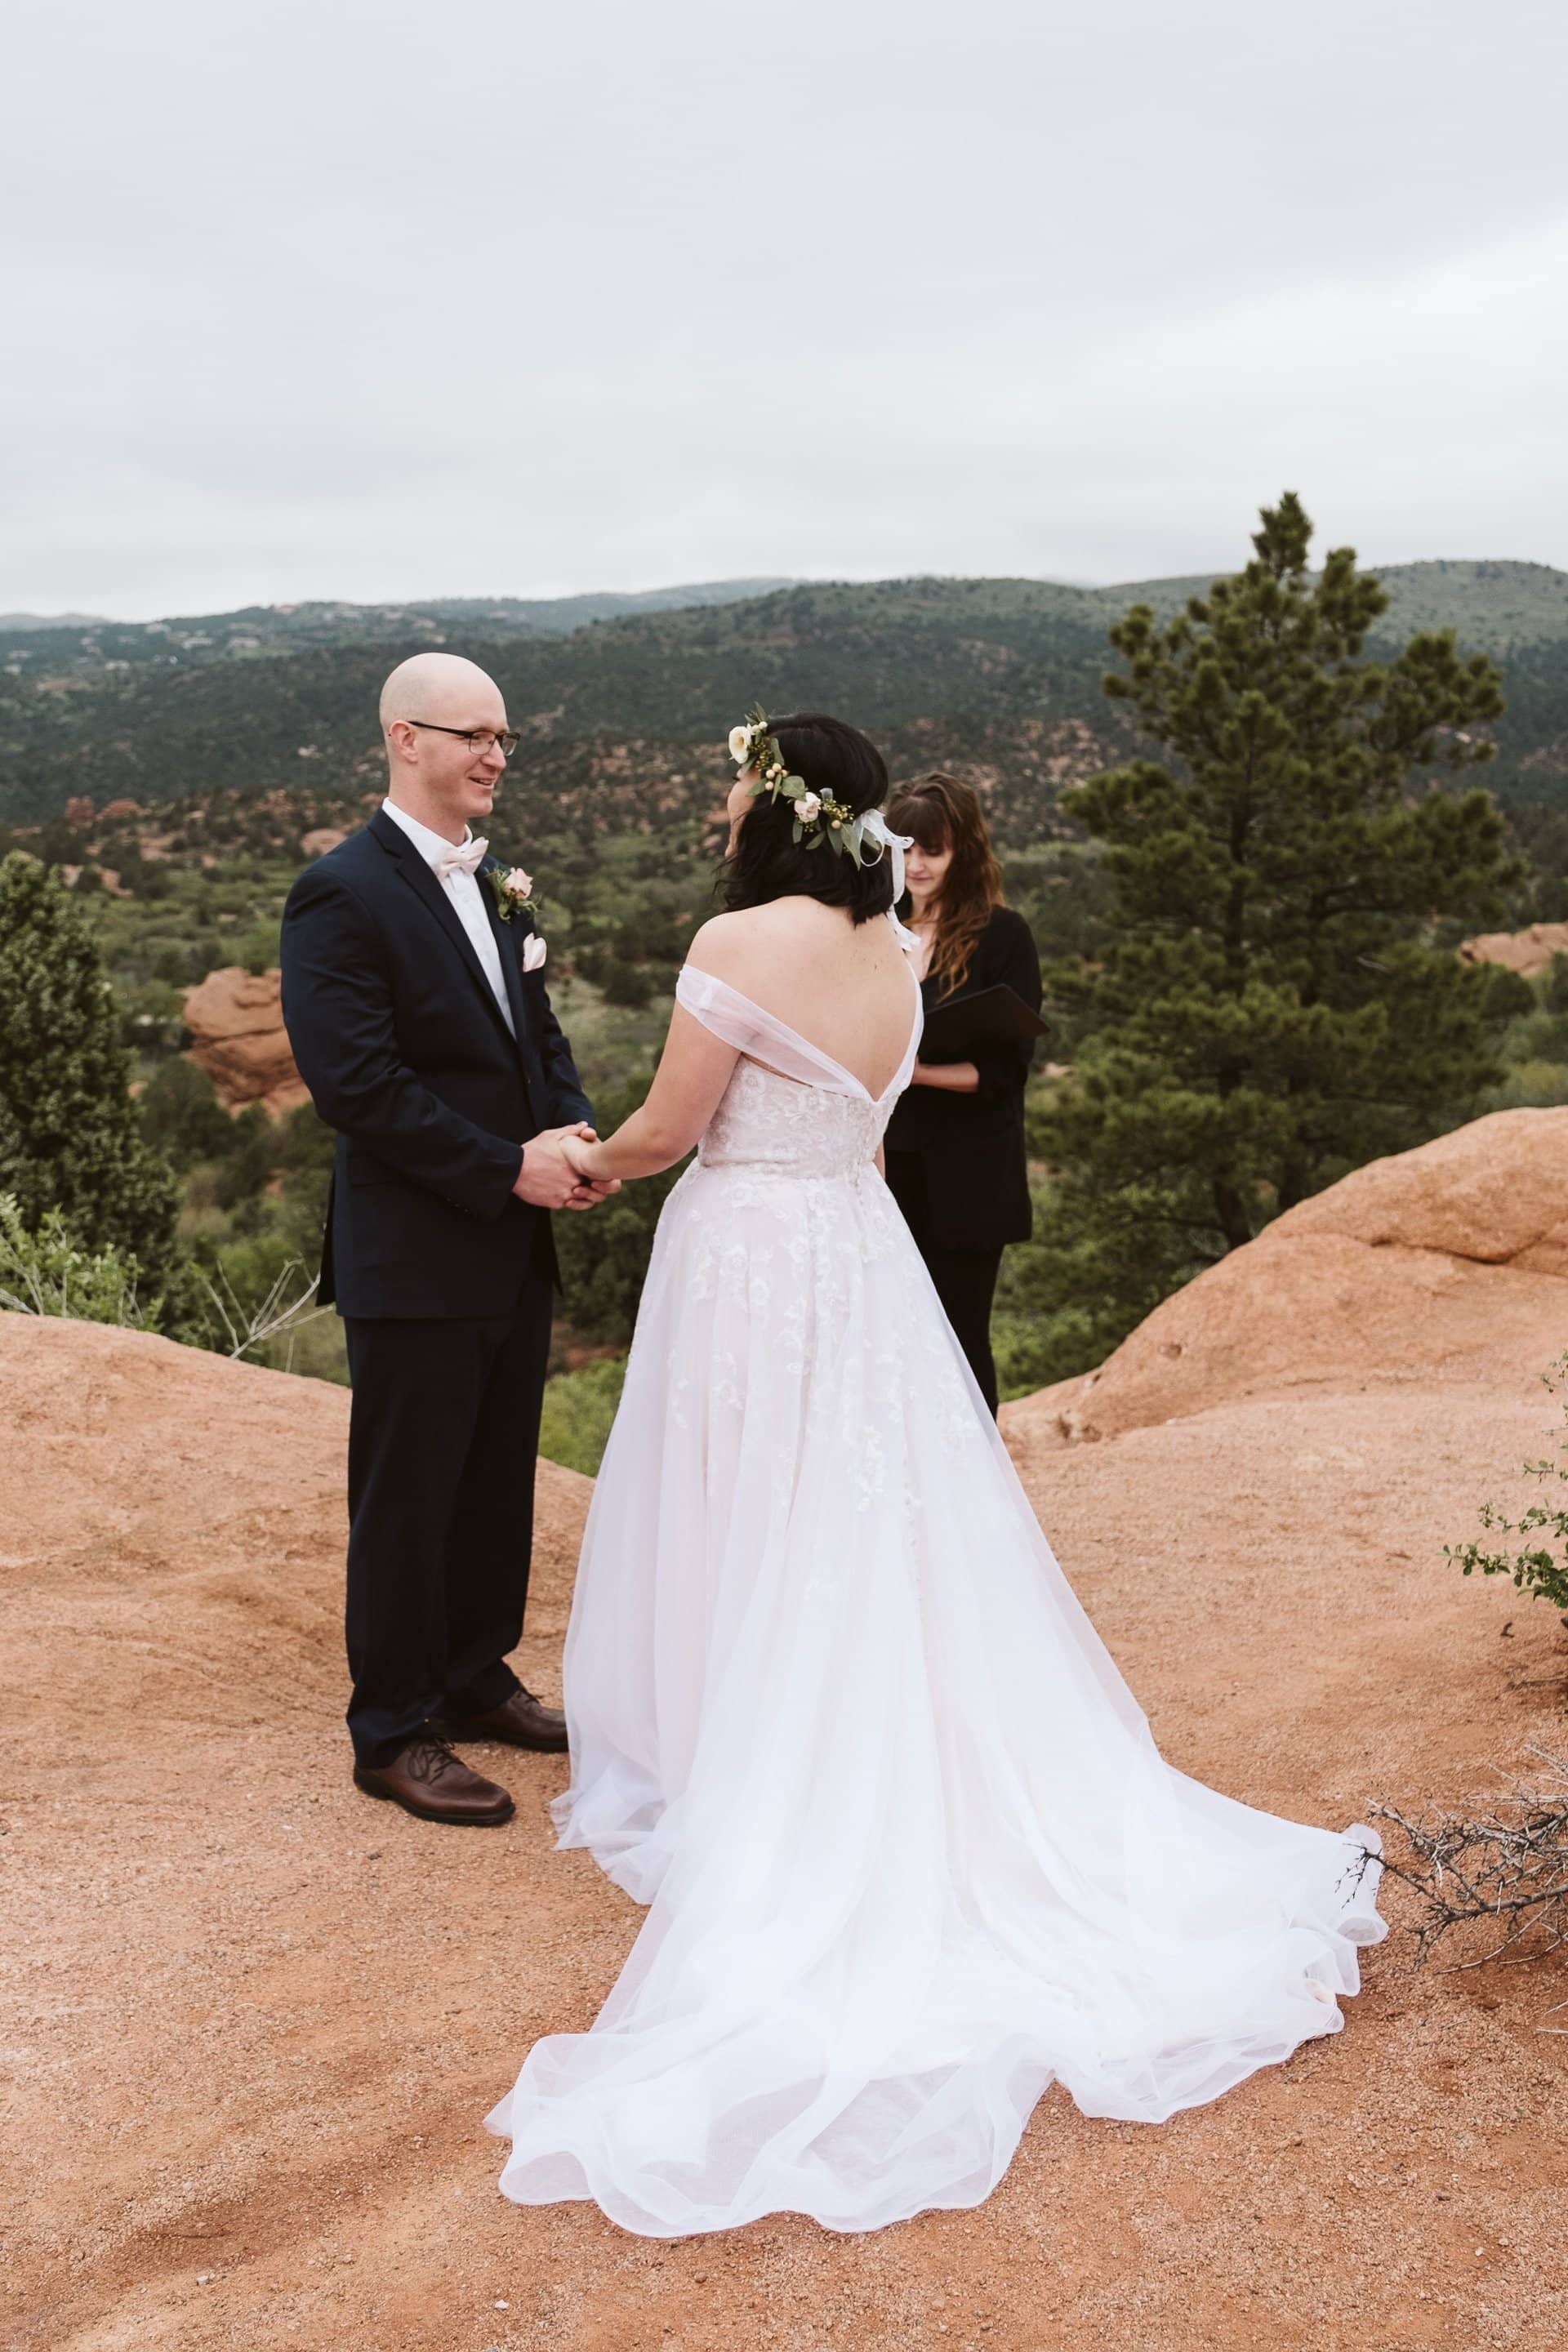 Elopement ceremony at Garden of the Gods in Colorado Springs